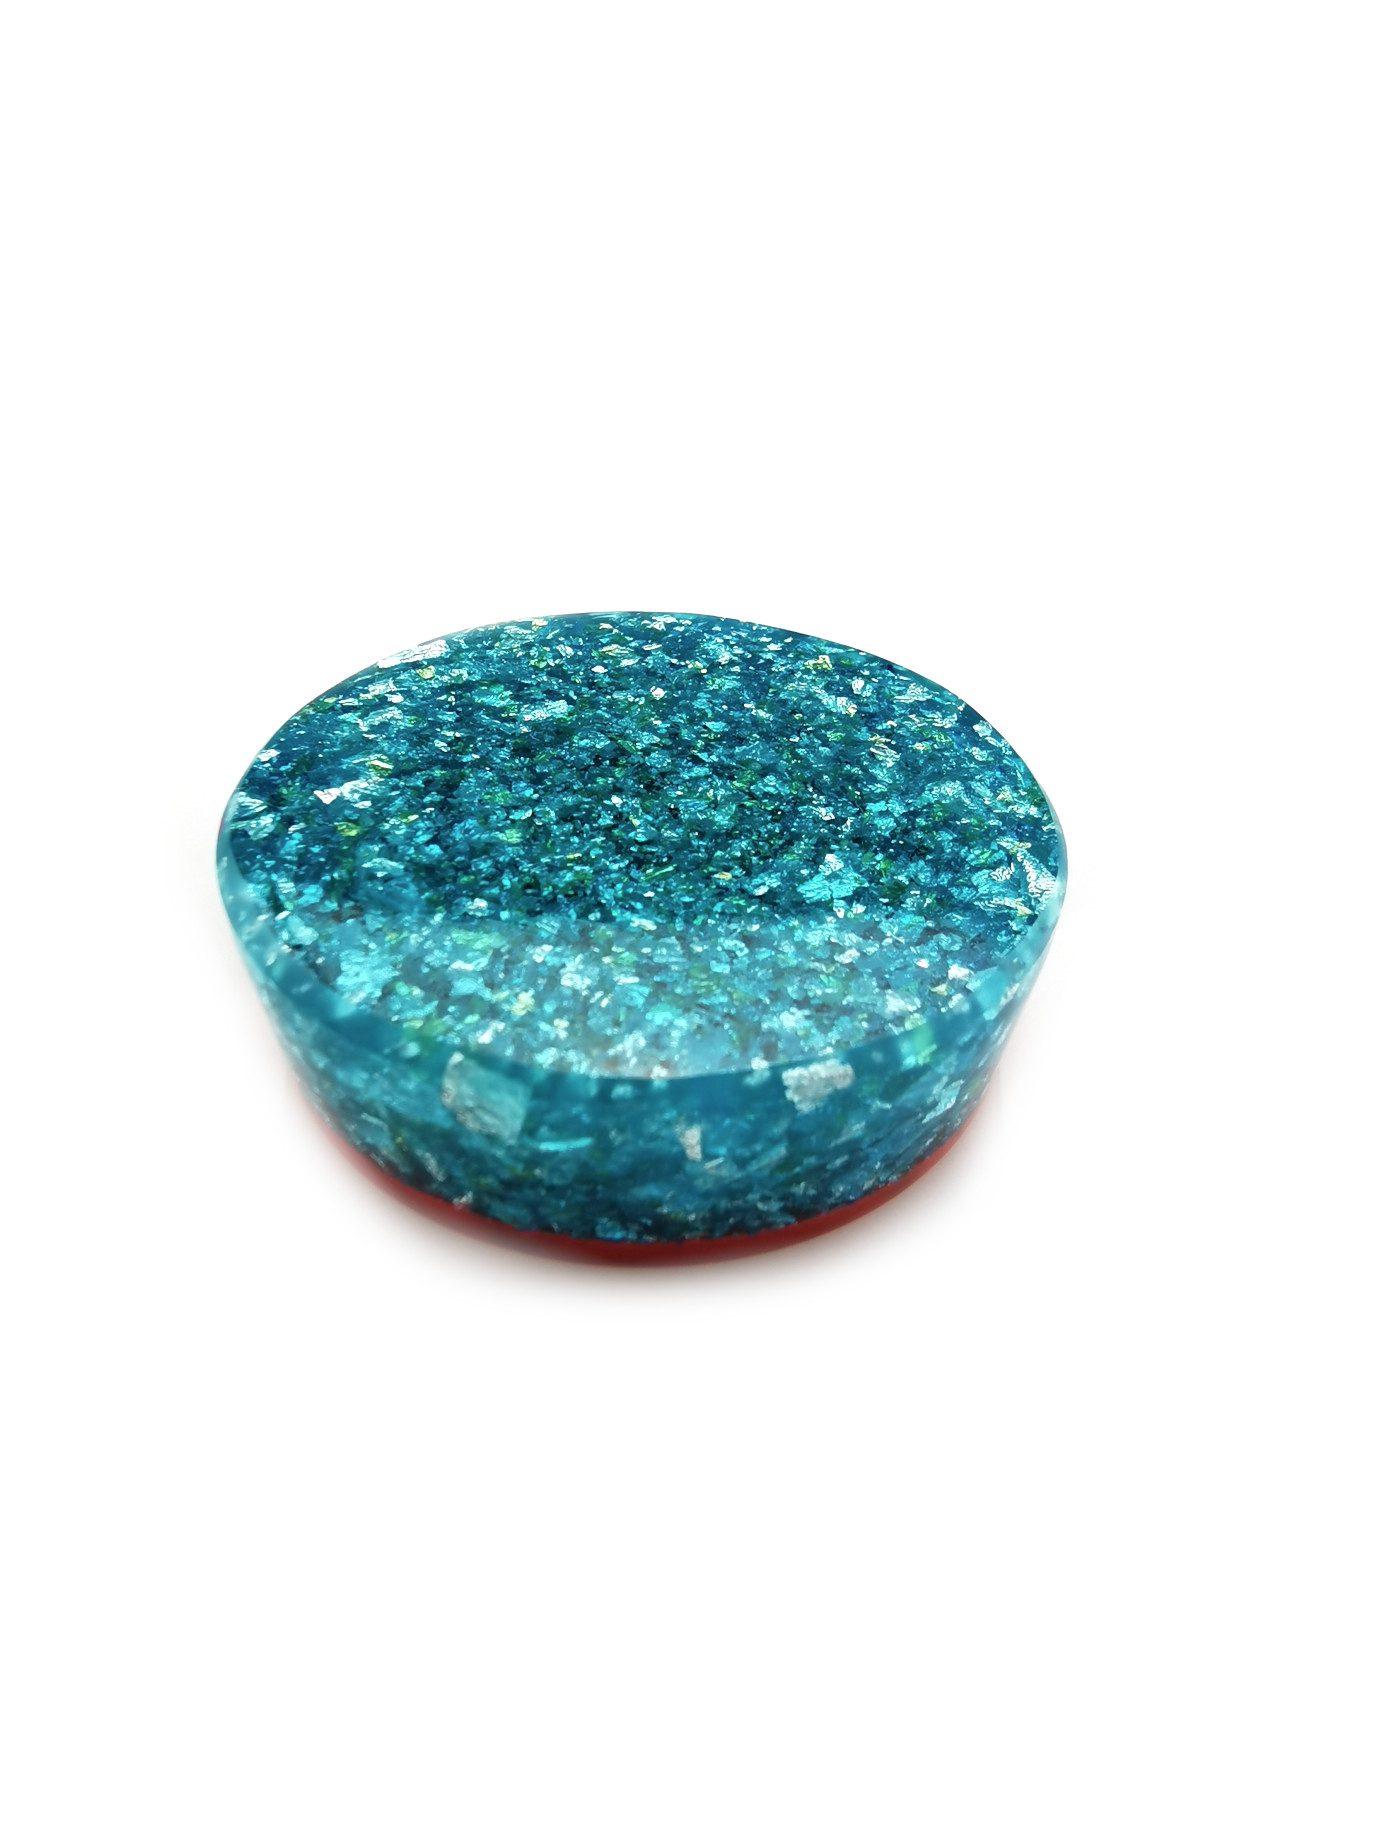 Red and Blue Flower of Life Orgone Meditation Puck by OrgoneVibes